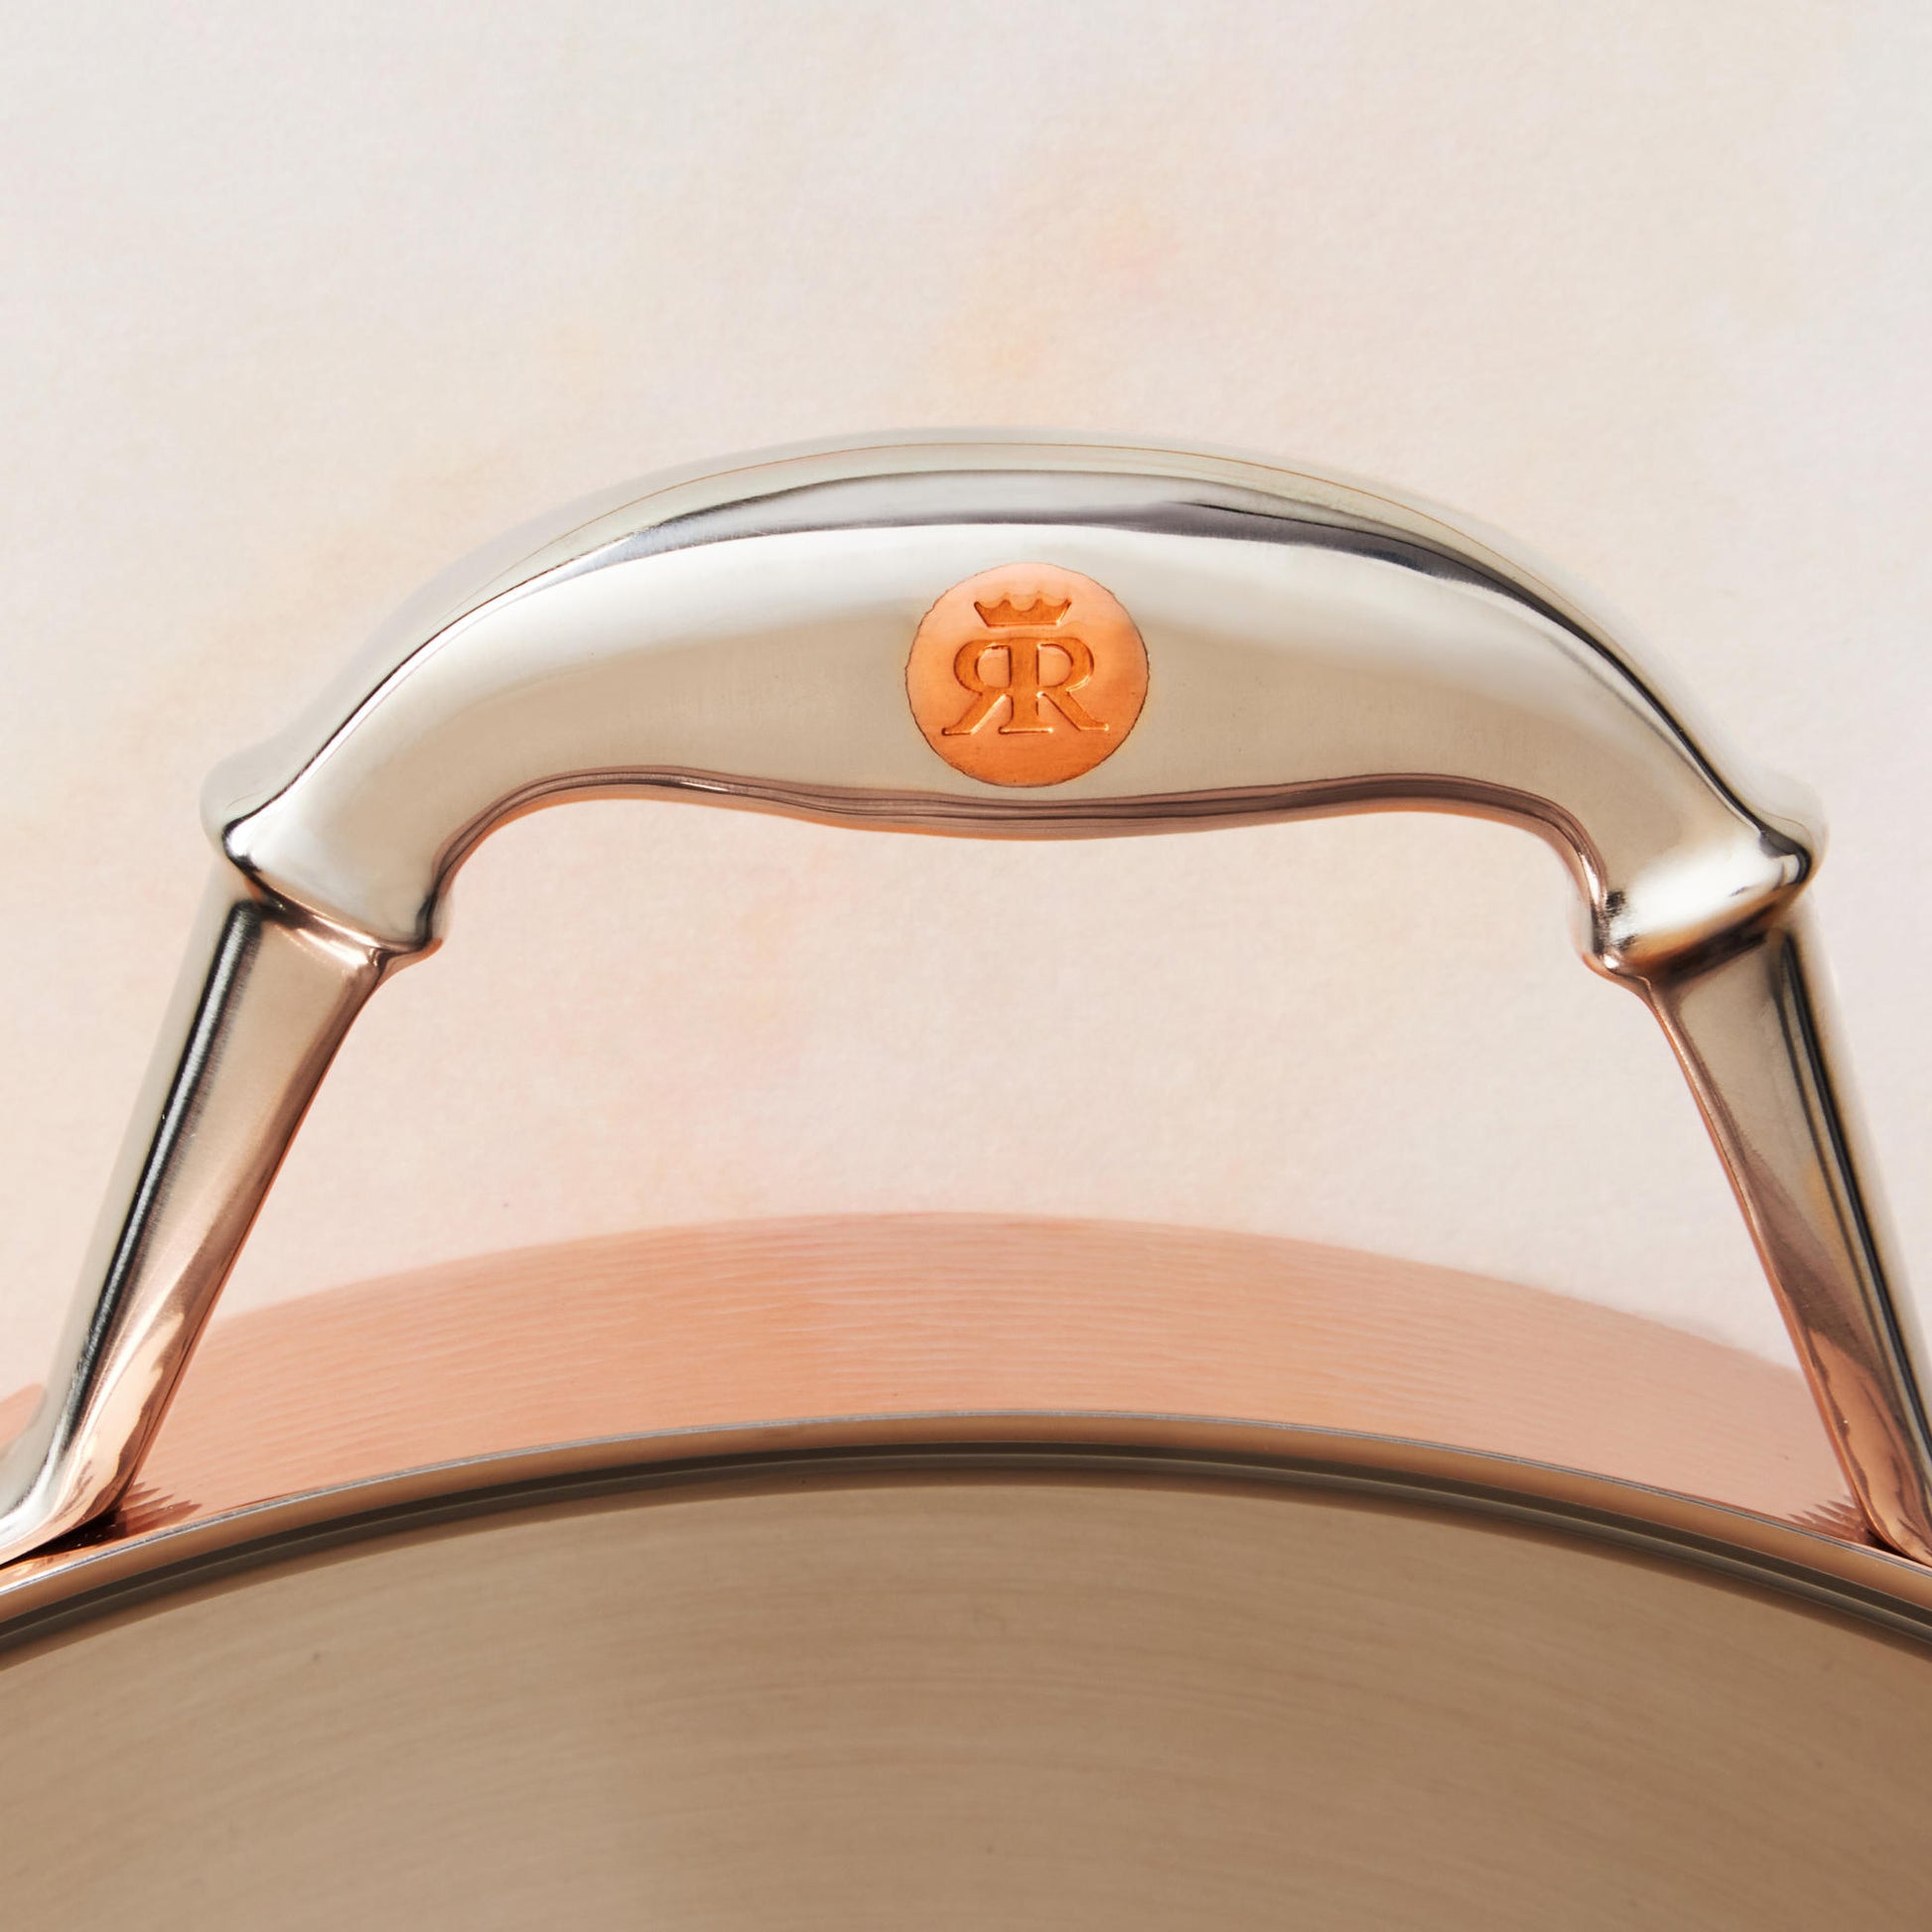 Comfortable stainless steel handle with decorative inlaid copper coing by Ruffoni